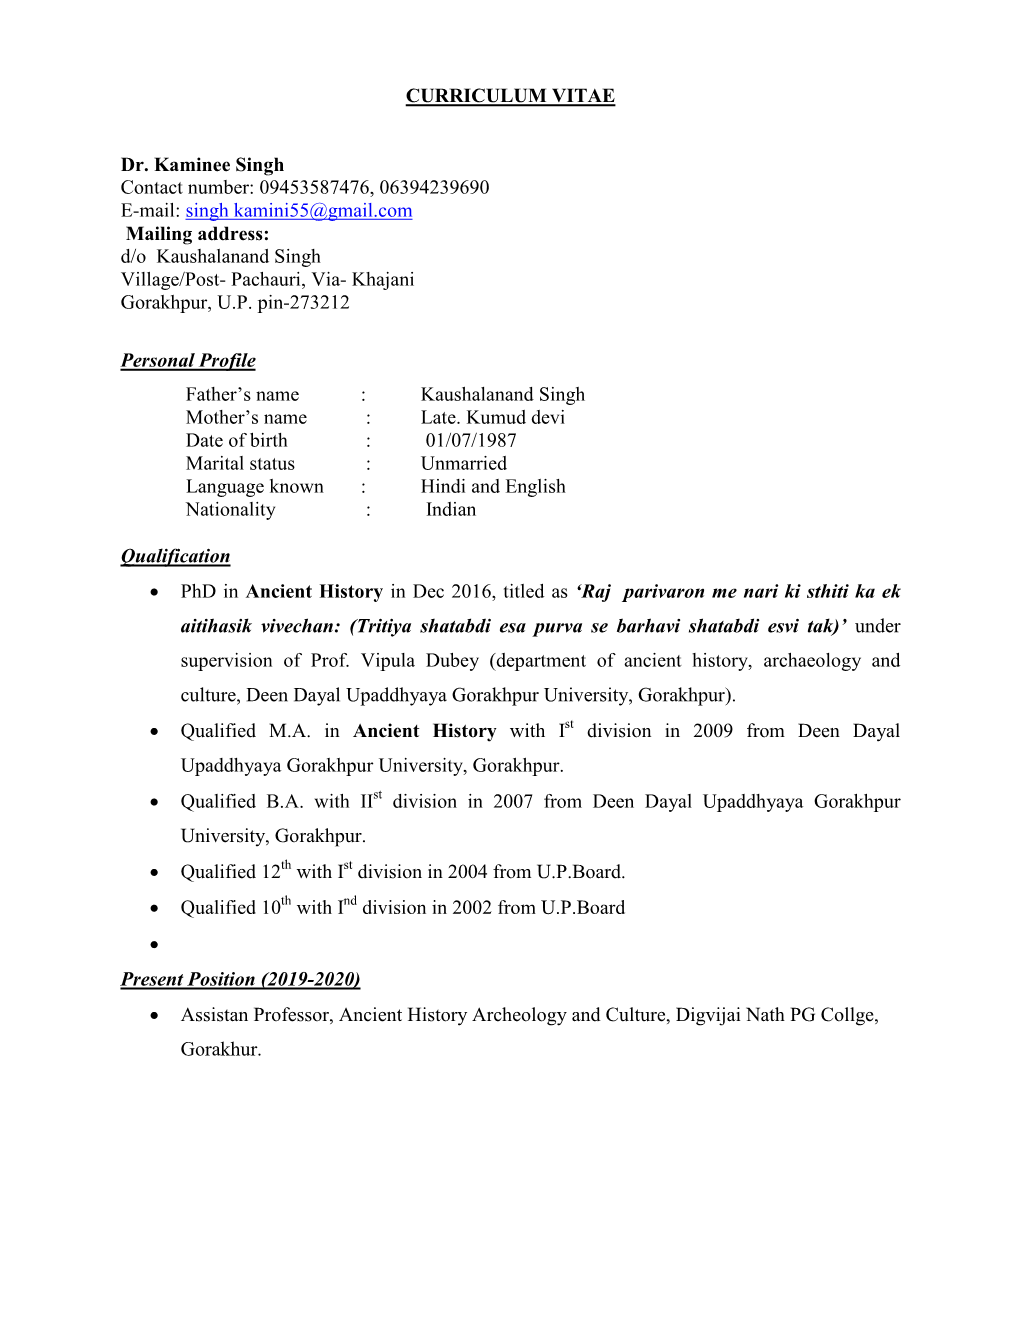 CURRICULUM VITAE Dr. Kaminee Singh Contact Number